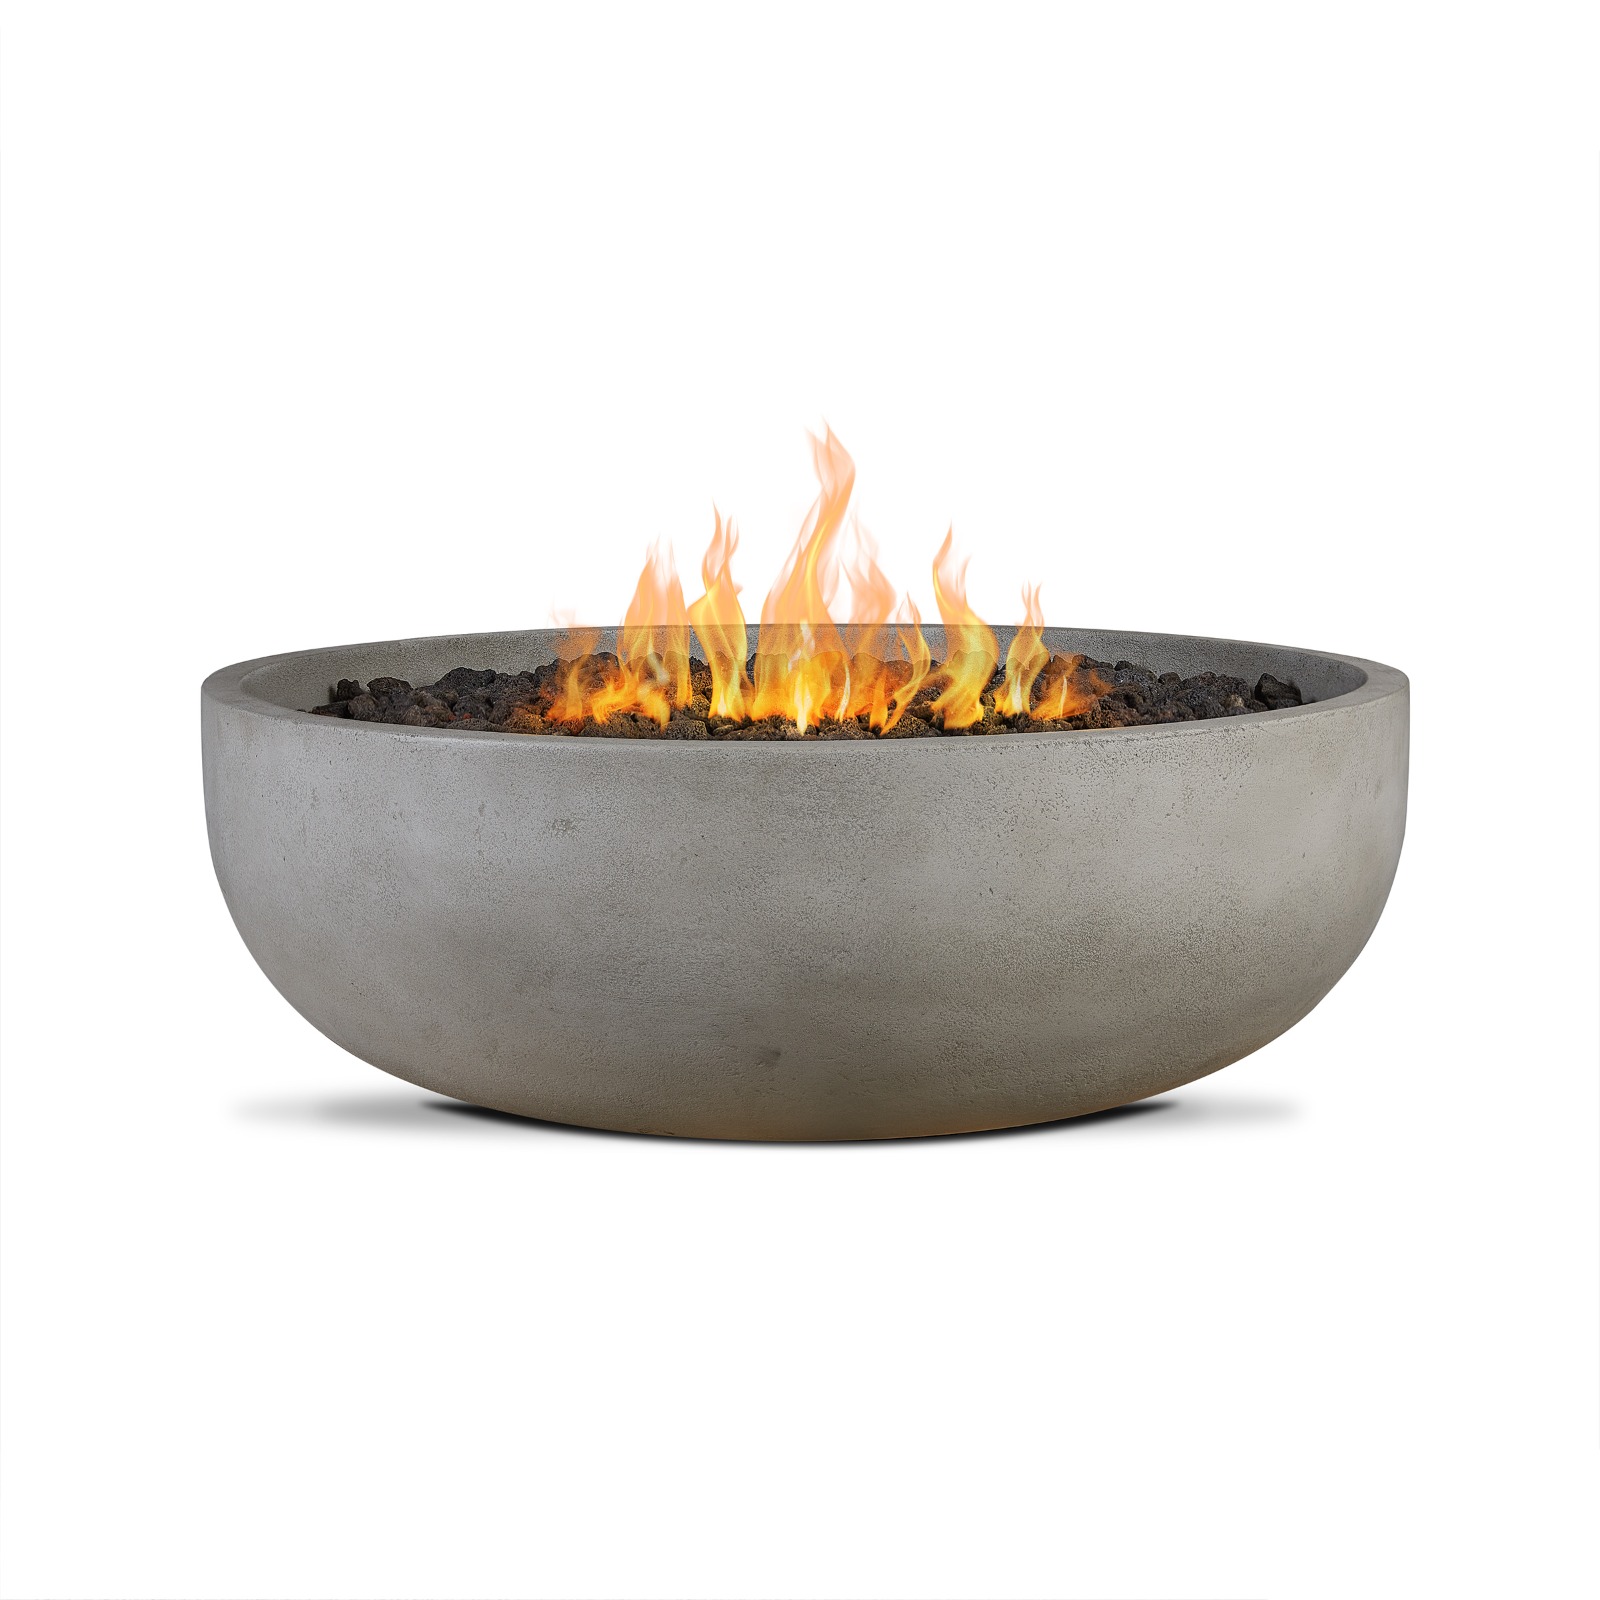 Carson 38" Propane Fire Pit Fire Bowl Outdoor Fireplace Fire Table for Backyard or Patio